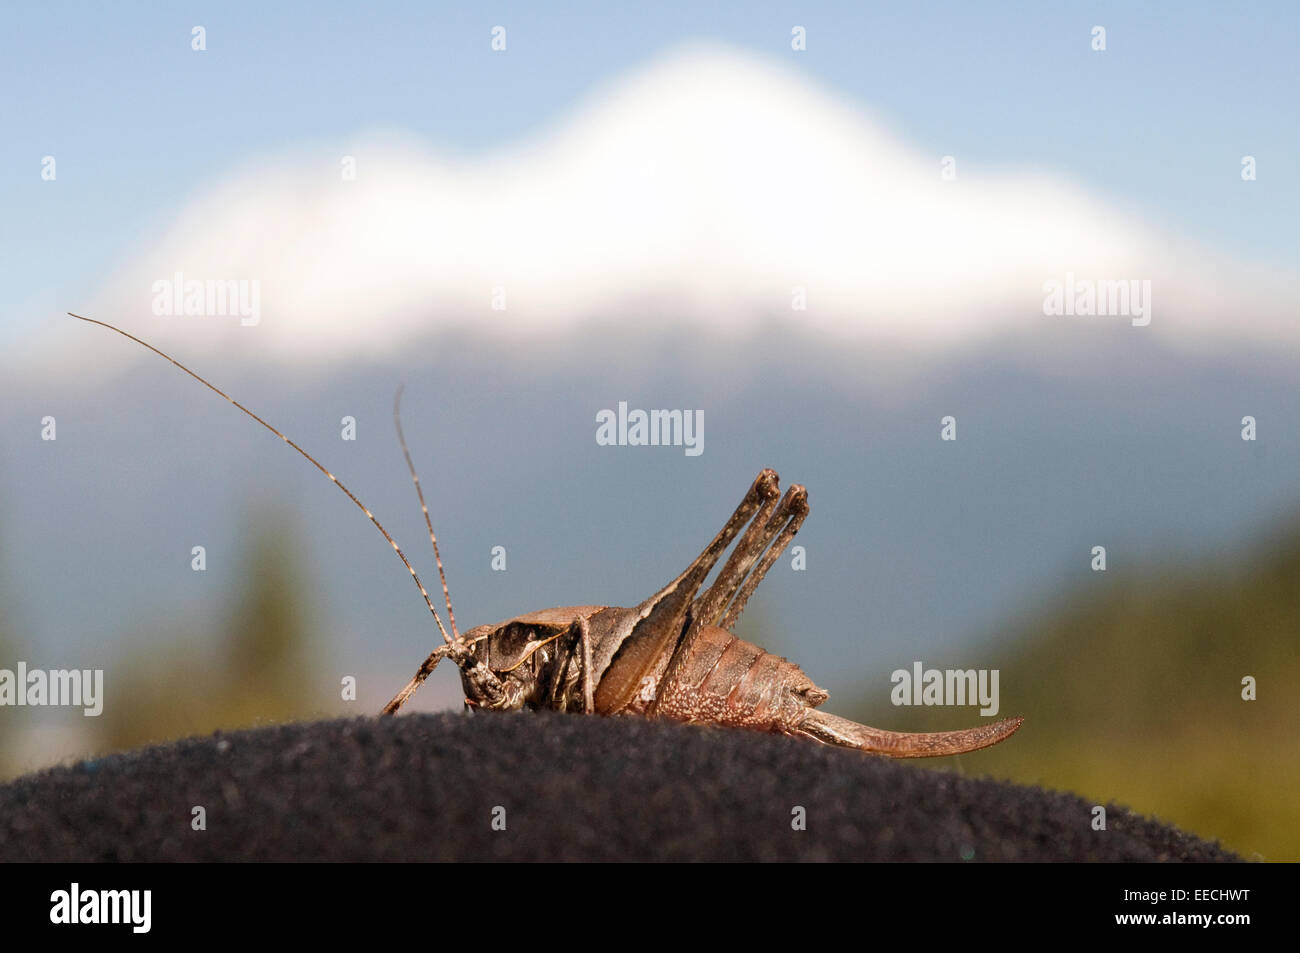 Cricket insect, Mount Shasta in distance Stock Photo